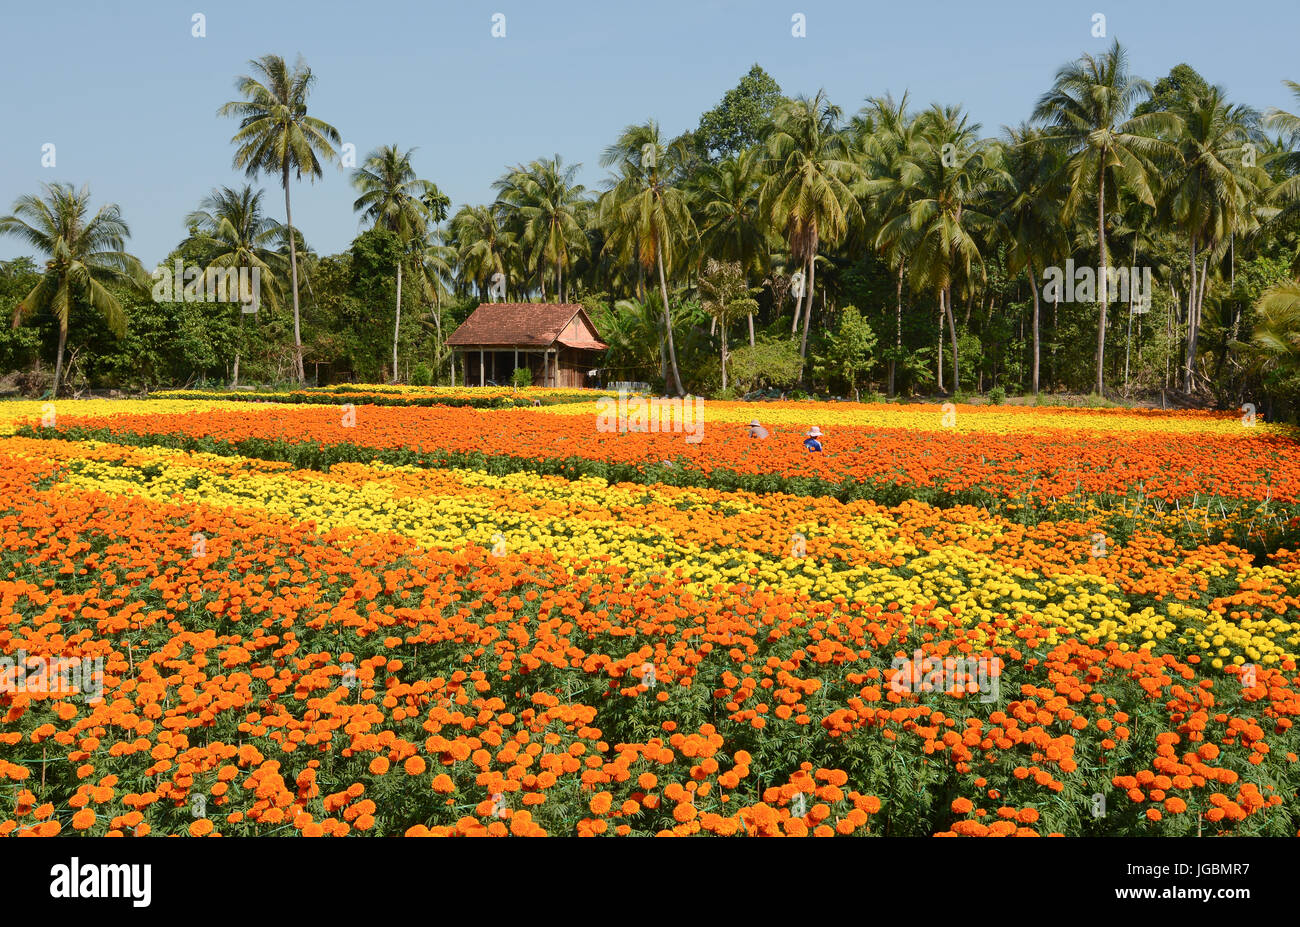 Tagetes flower plantation with the traditional wooden house at sunny day in Mekong Delta, Vietnam. Stock Photo